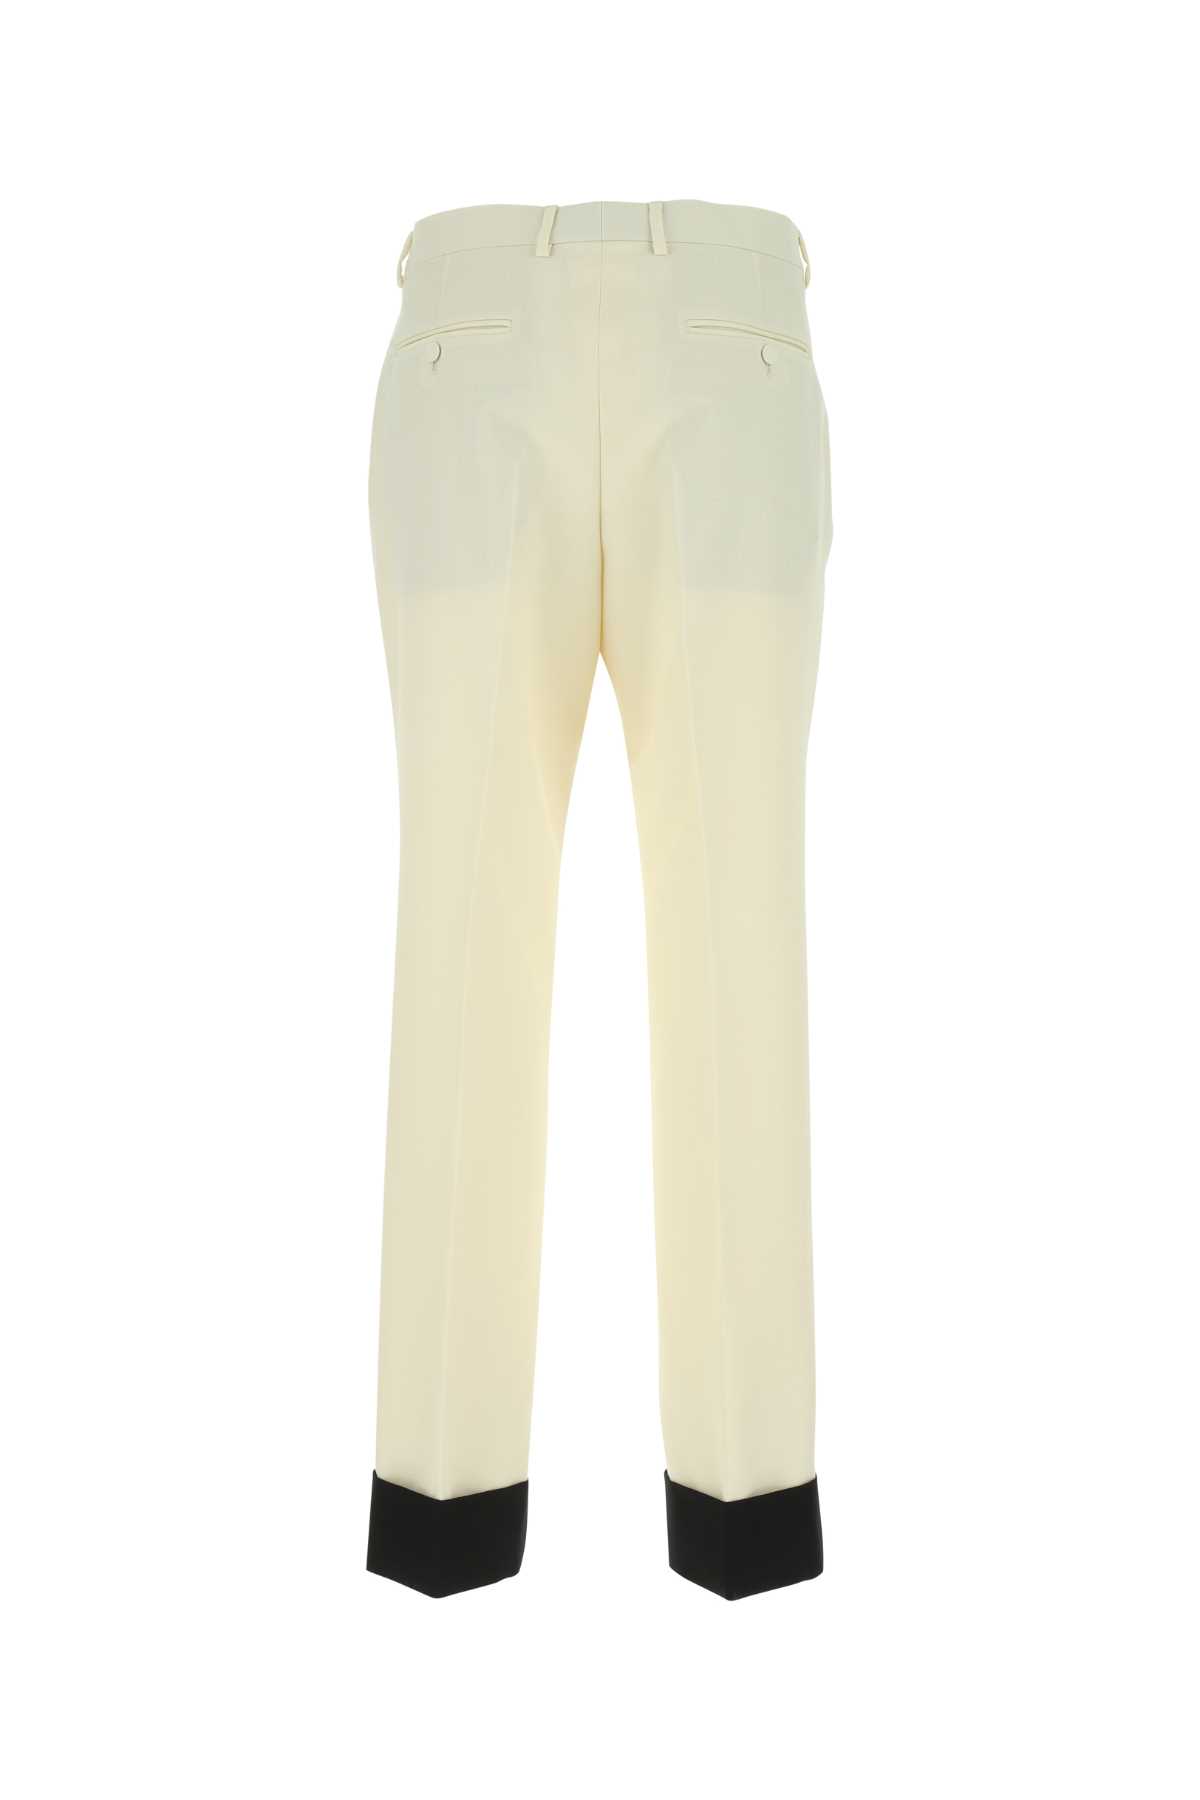 Gucci Ivory Wool Blend Pant In 9198